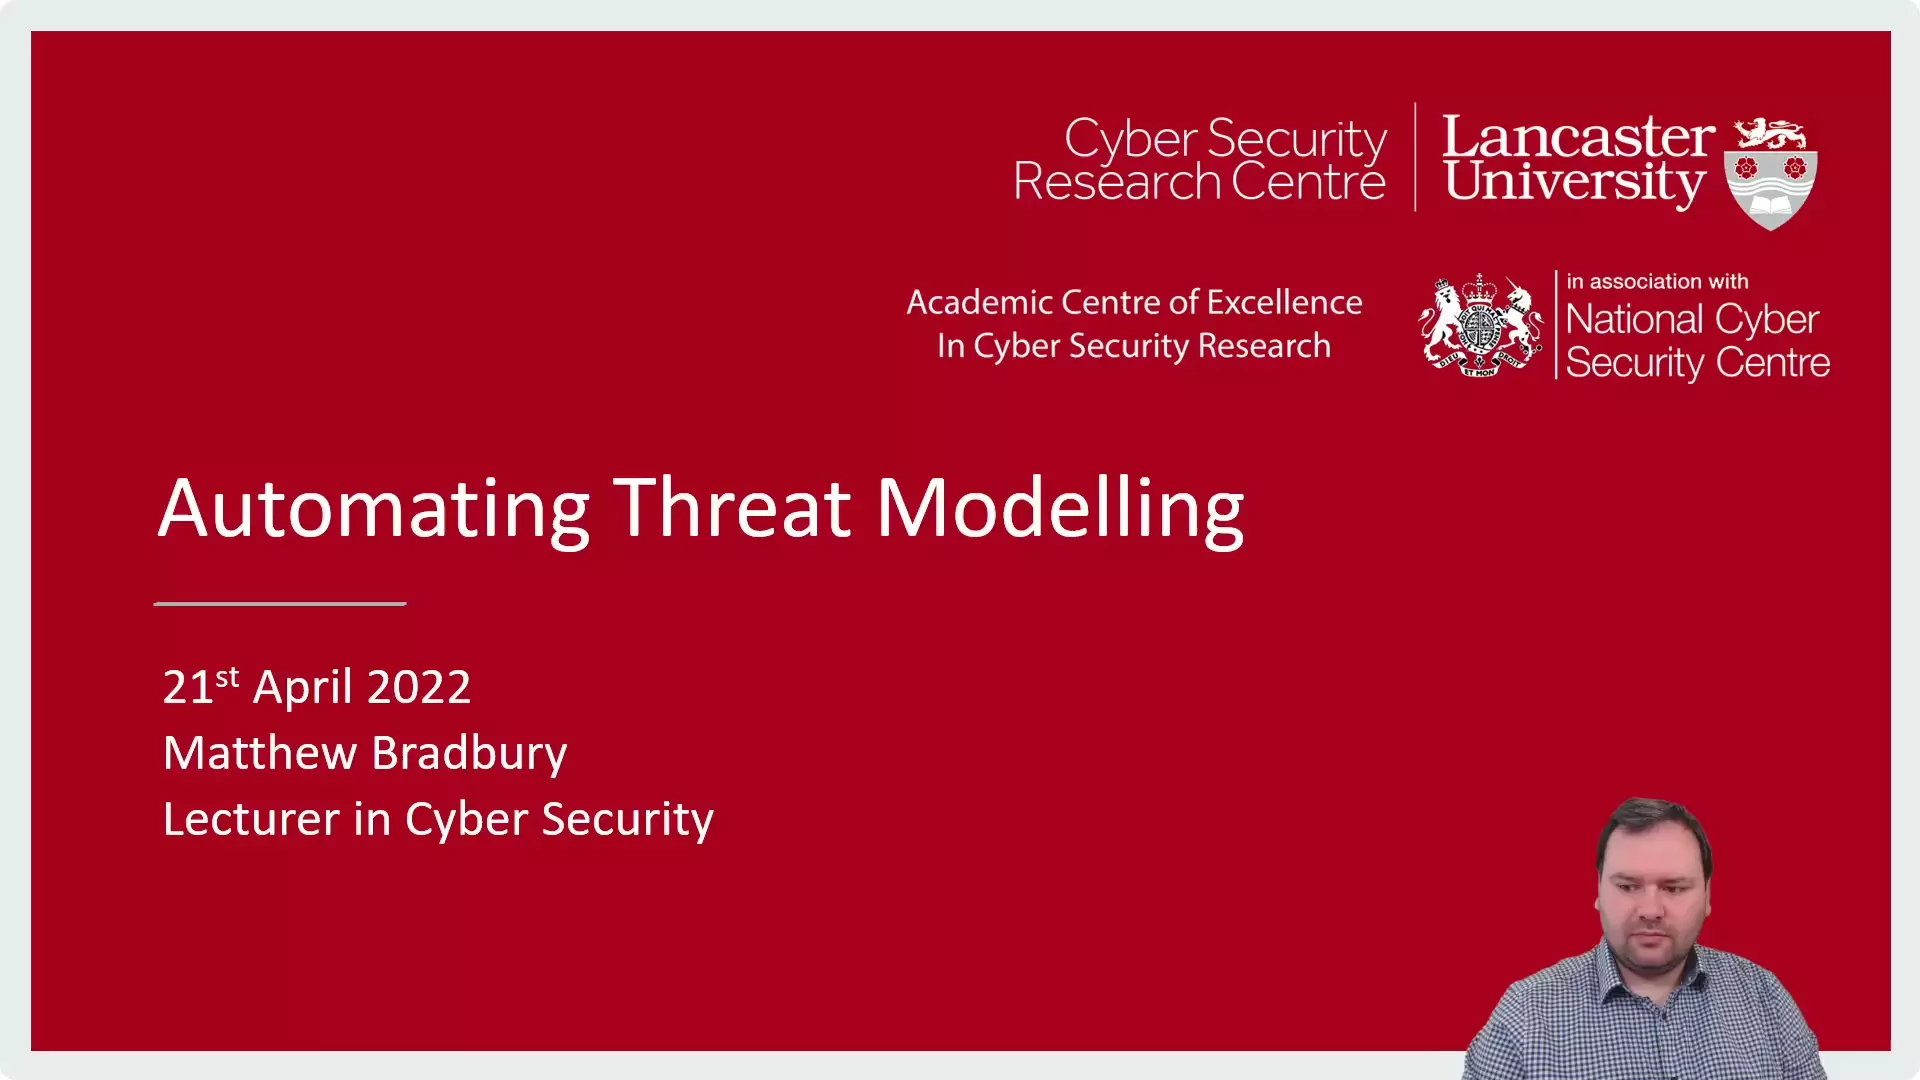 Matthew Bradbury presenting the first slide of the presentation with the title Automating Threat Modelling